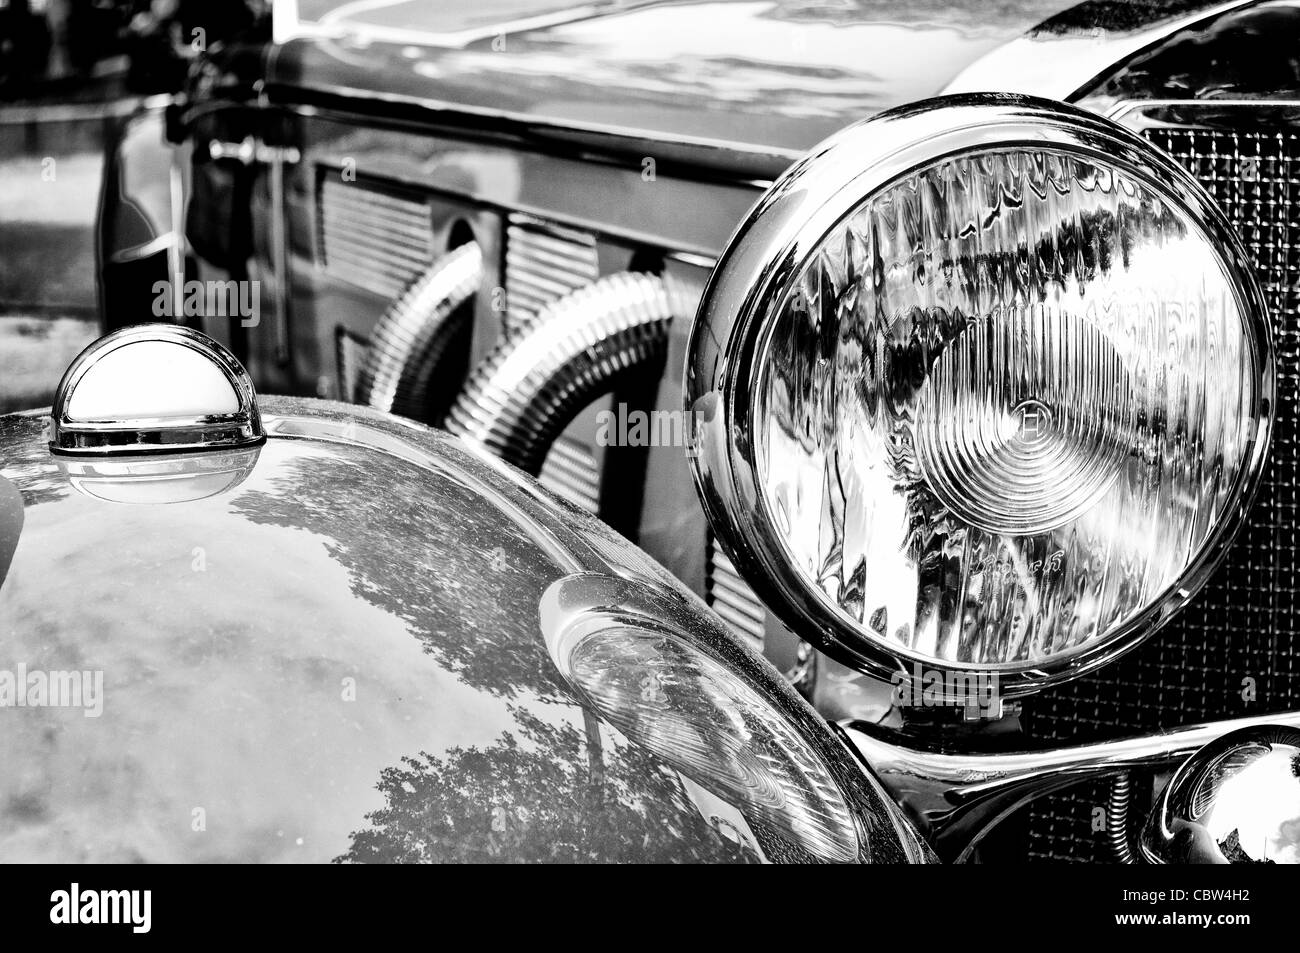 Exhaust Hood Black and White Stock Photos & Images - Alamy